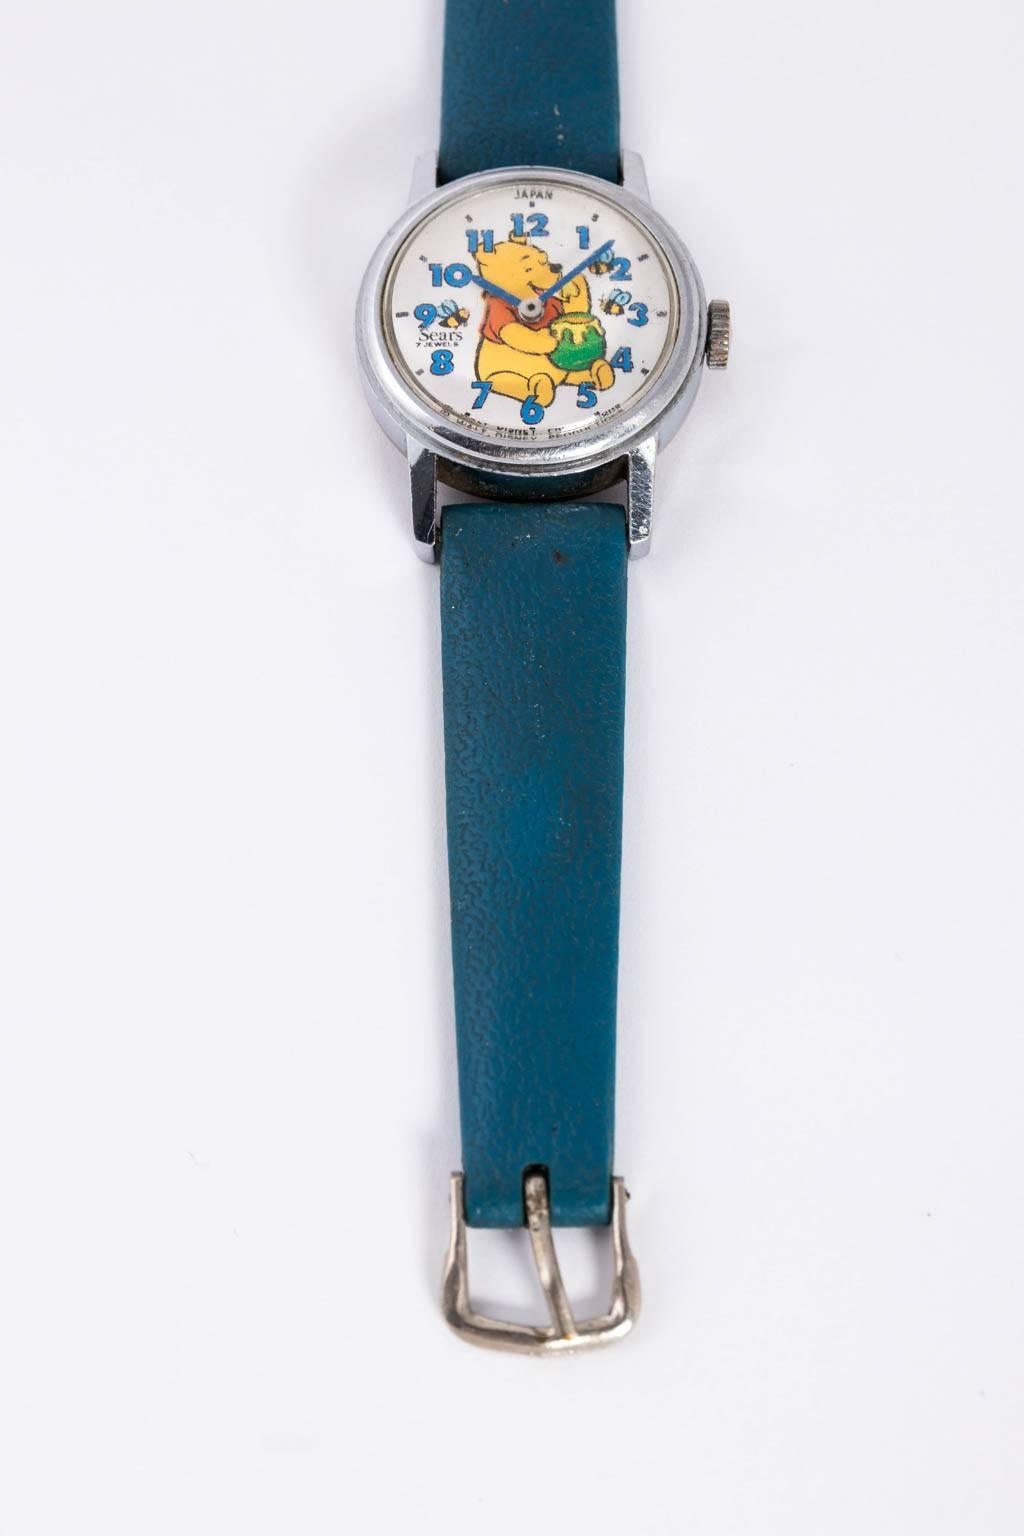 Circa 1960-1970 pair of rare vintage Winnie the Pooh mechanical watches by Sears. Windable with original blue leather arm bands. The copyright reads 